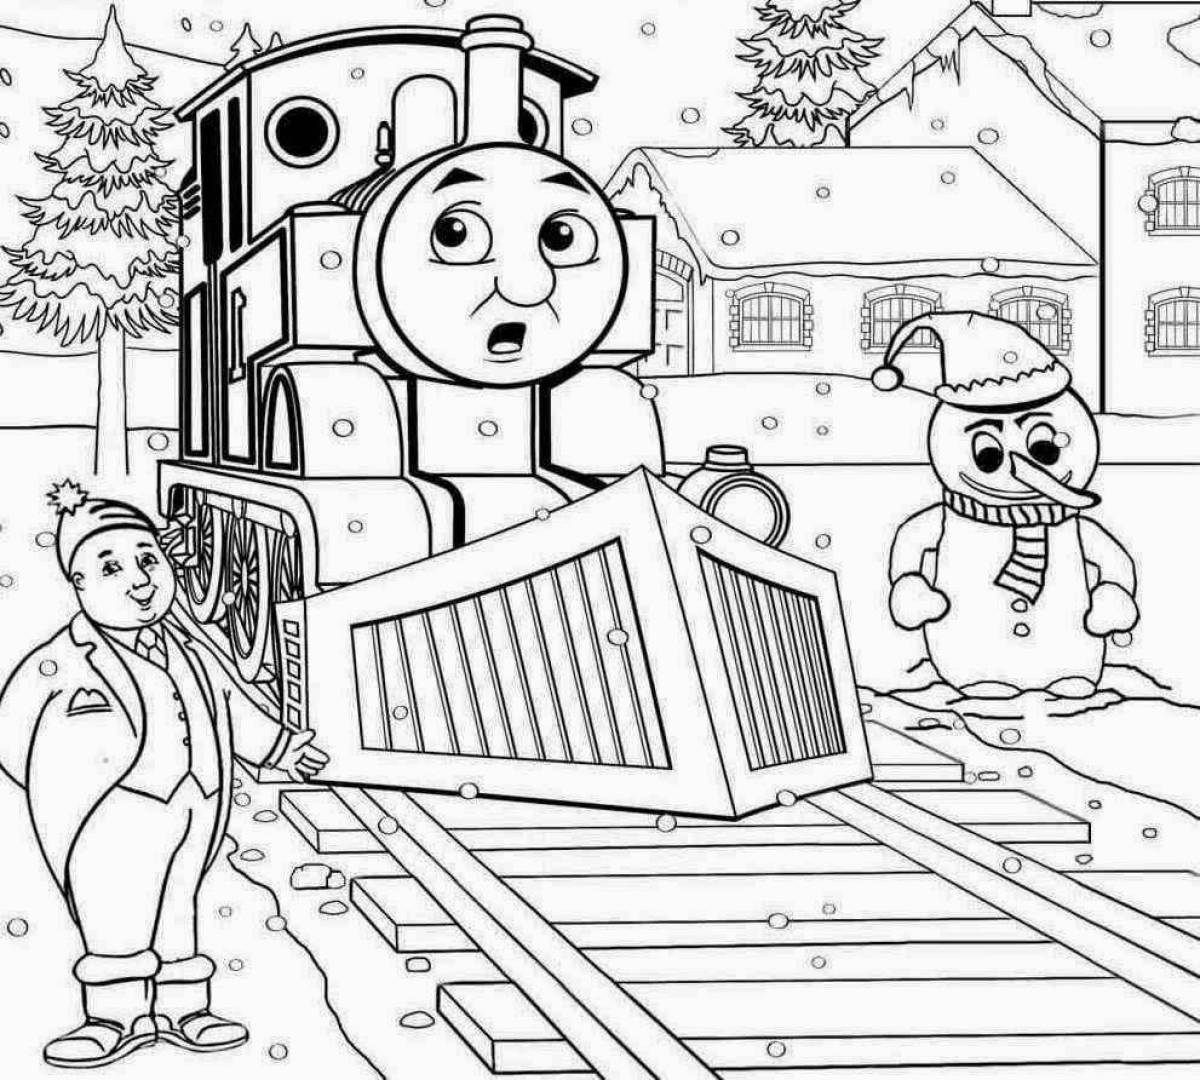 Coloring book outstanding thomas the tank engine